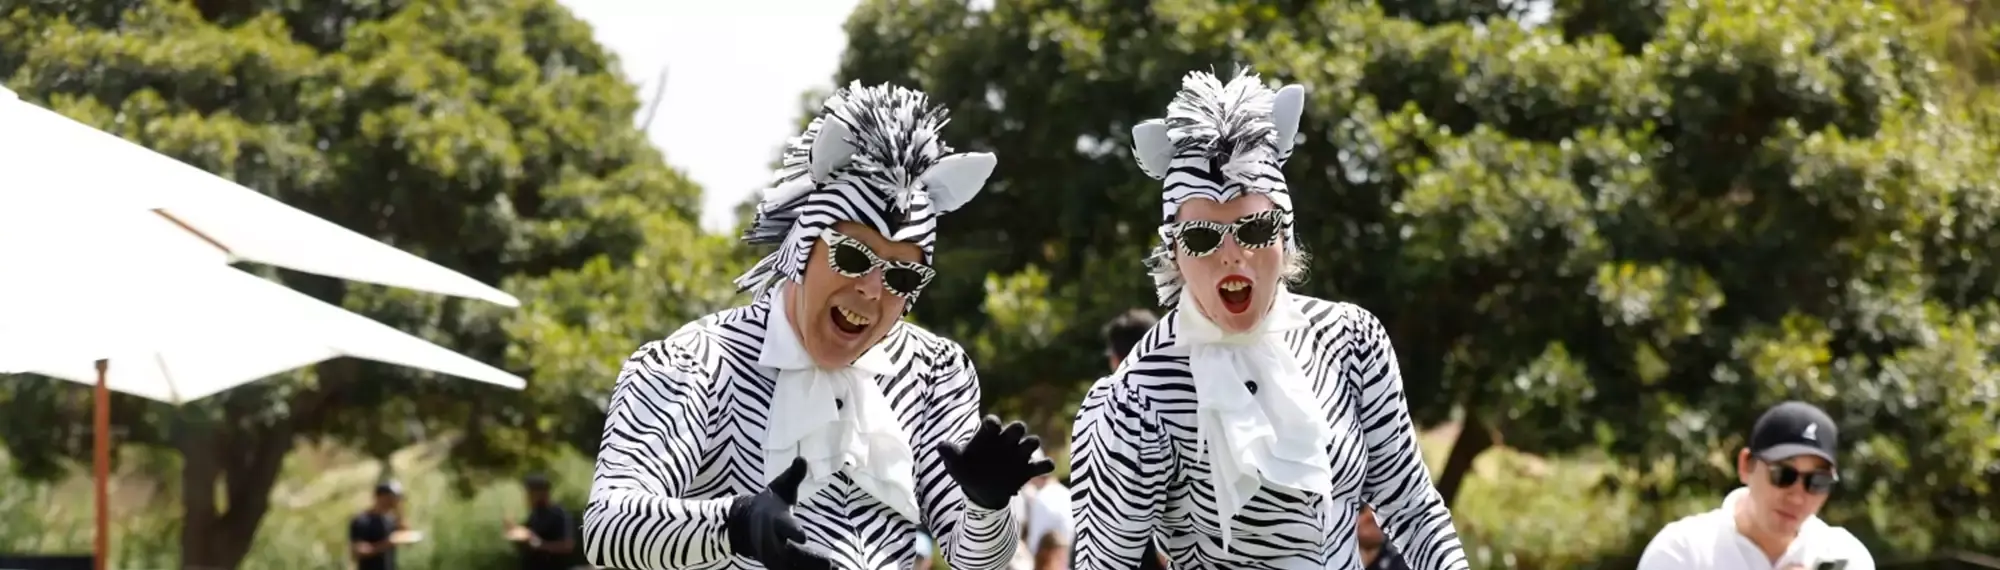 Two people dressed in zebra costumes making funny faces at the camera.